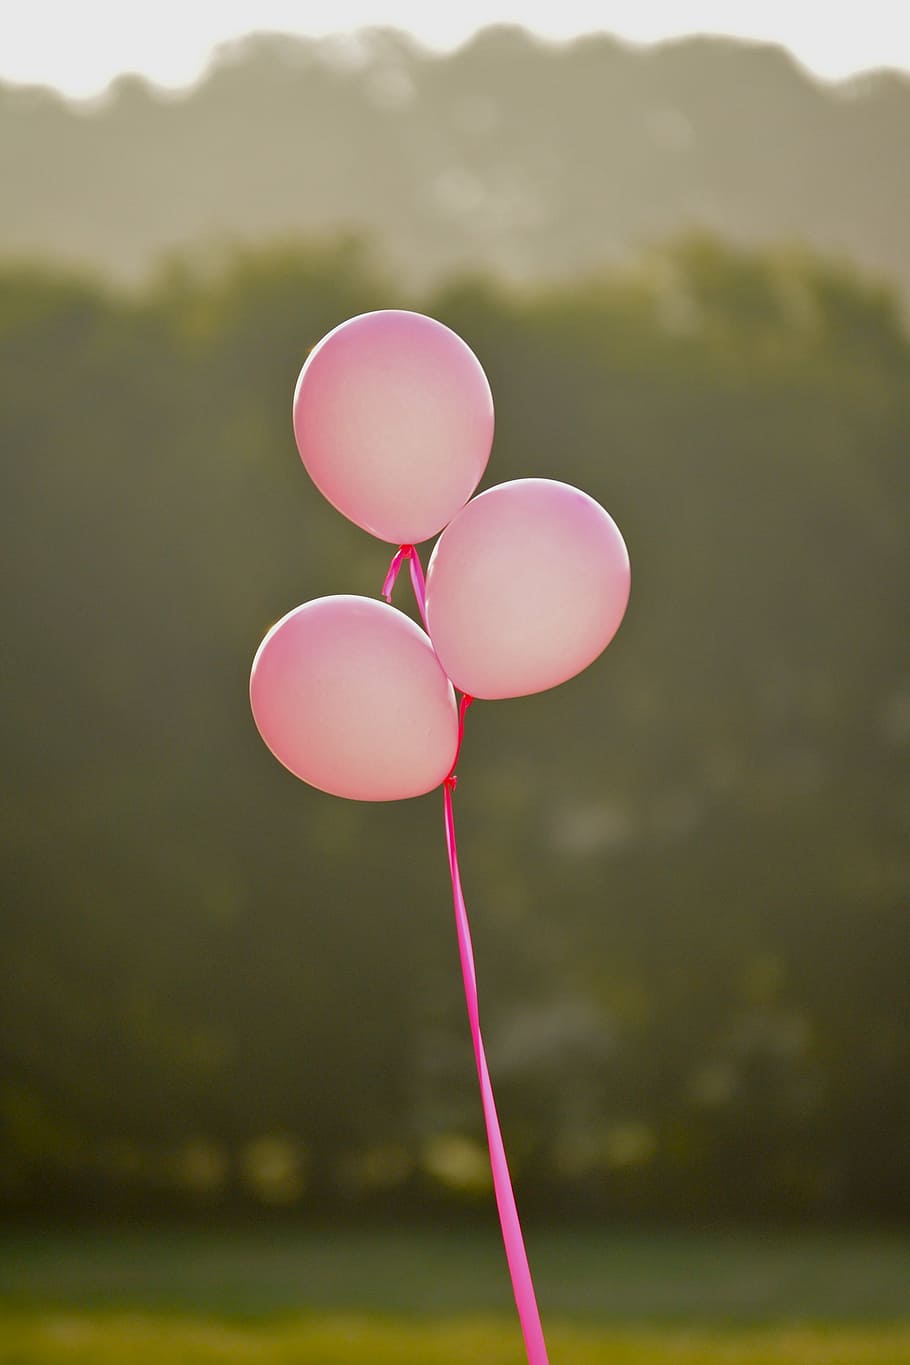 three pink balloons, pink, pink balloons, breast cancer, girl, female, celebration, balloons, cheerful, happy